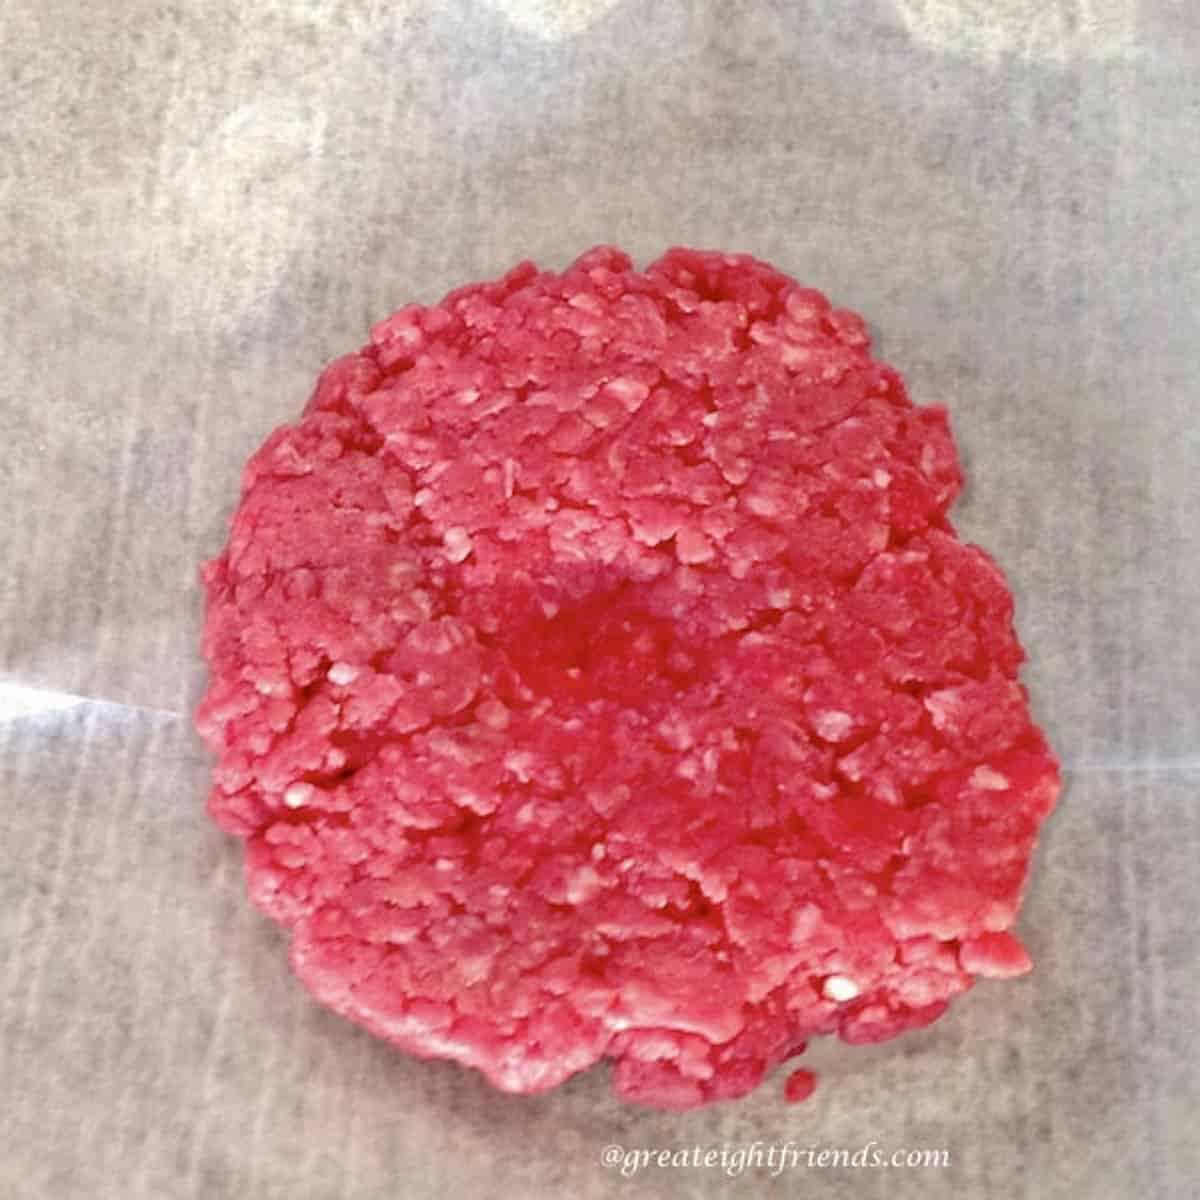 Raw hamburger with a dimple pressed in the middle of it.